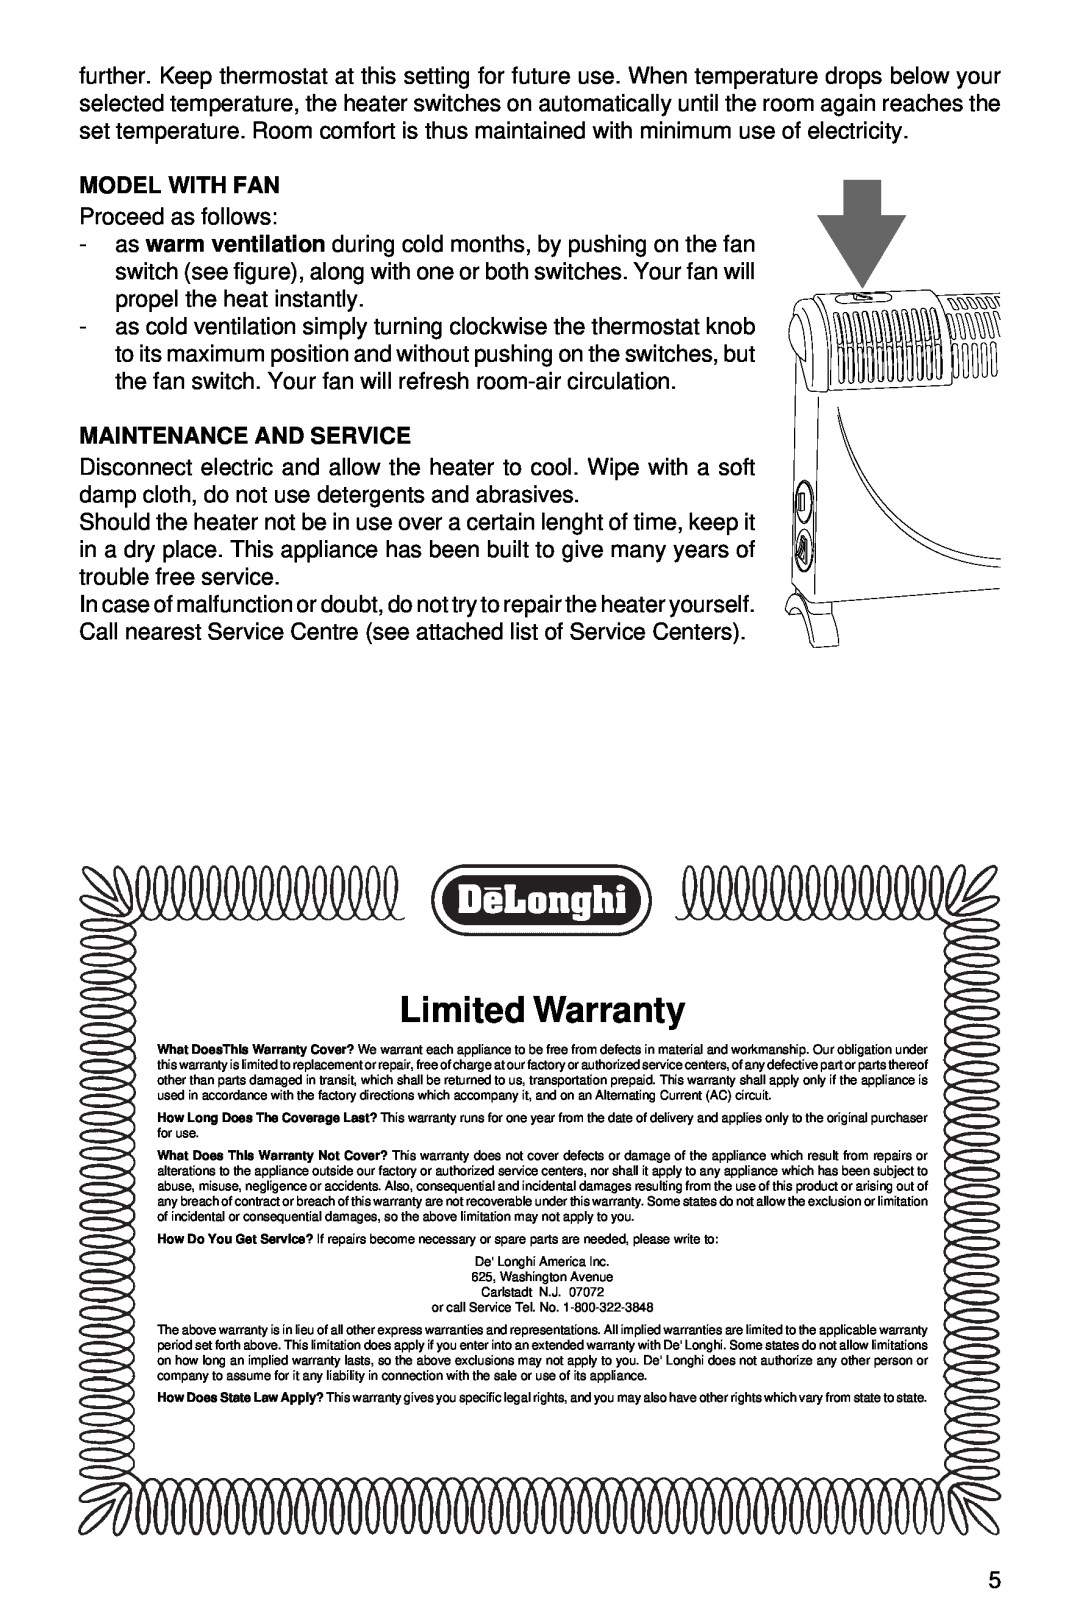 DeLonghi Electric Convector Heater manual Limited Warranty, Model With Fan, Maintenance And Service 